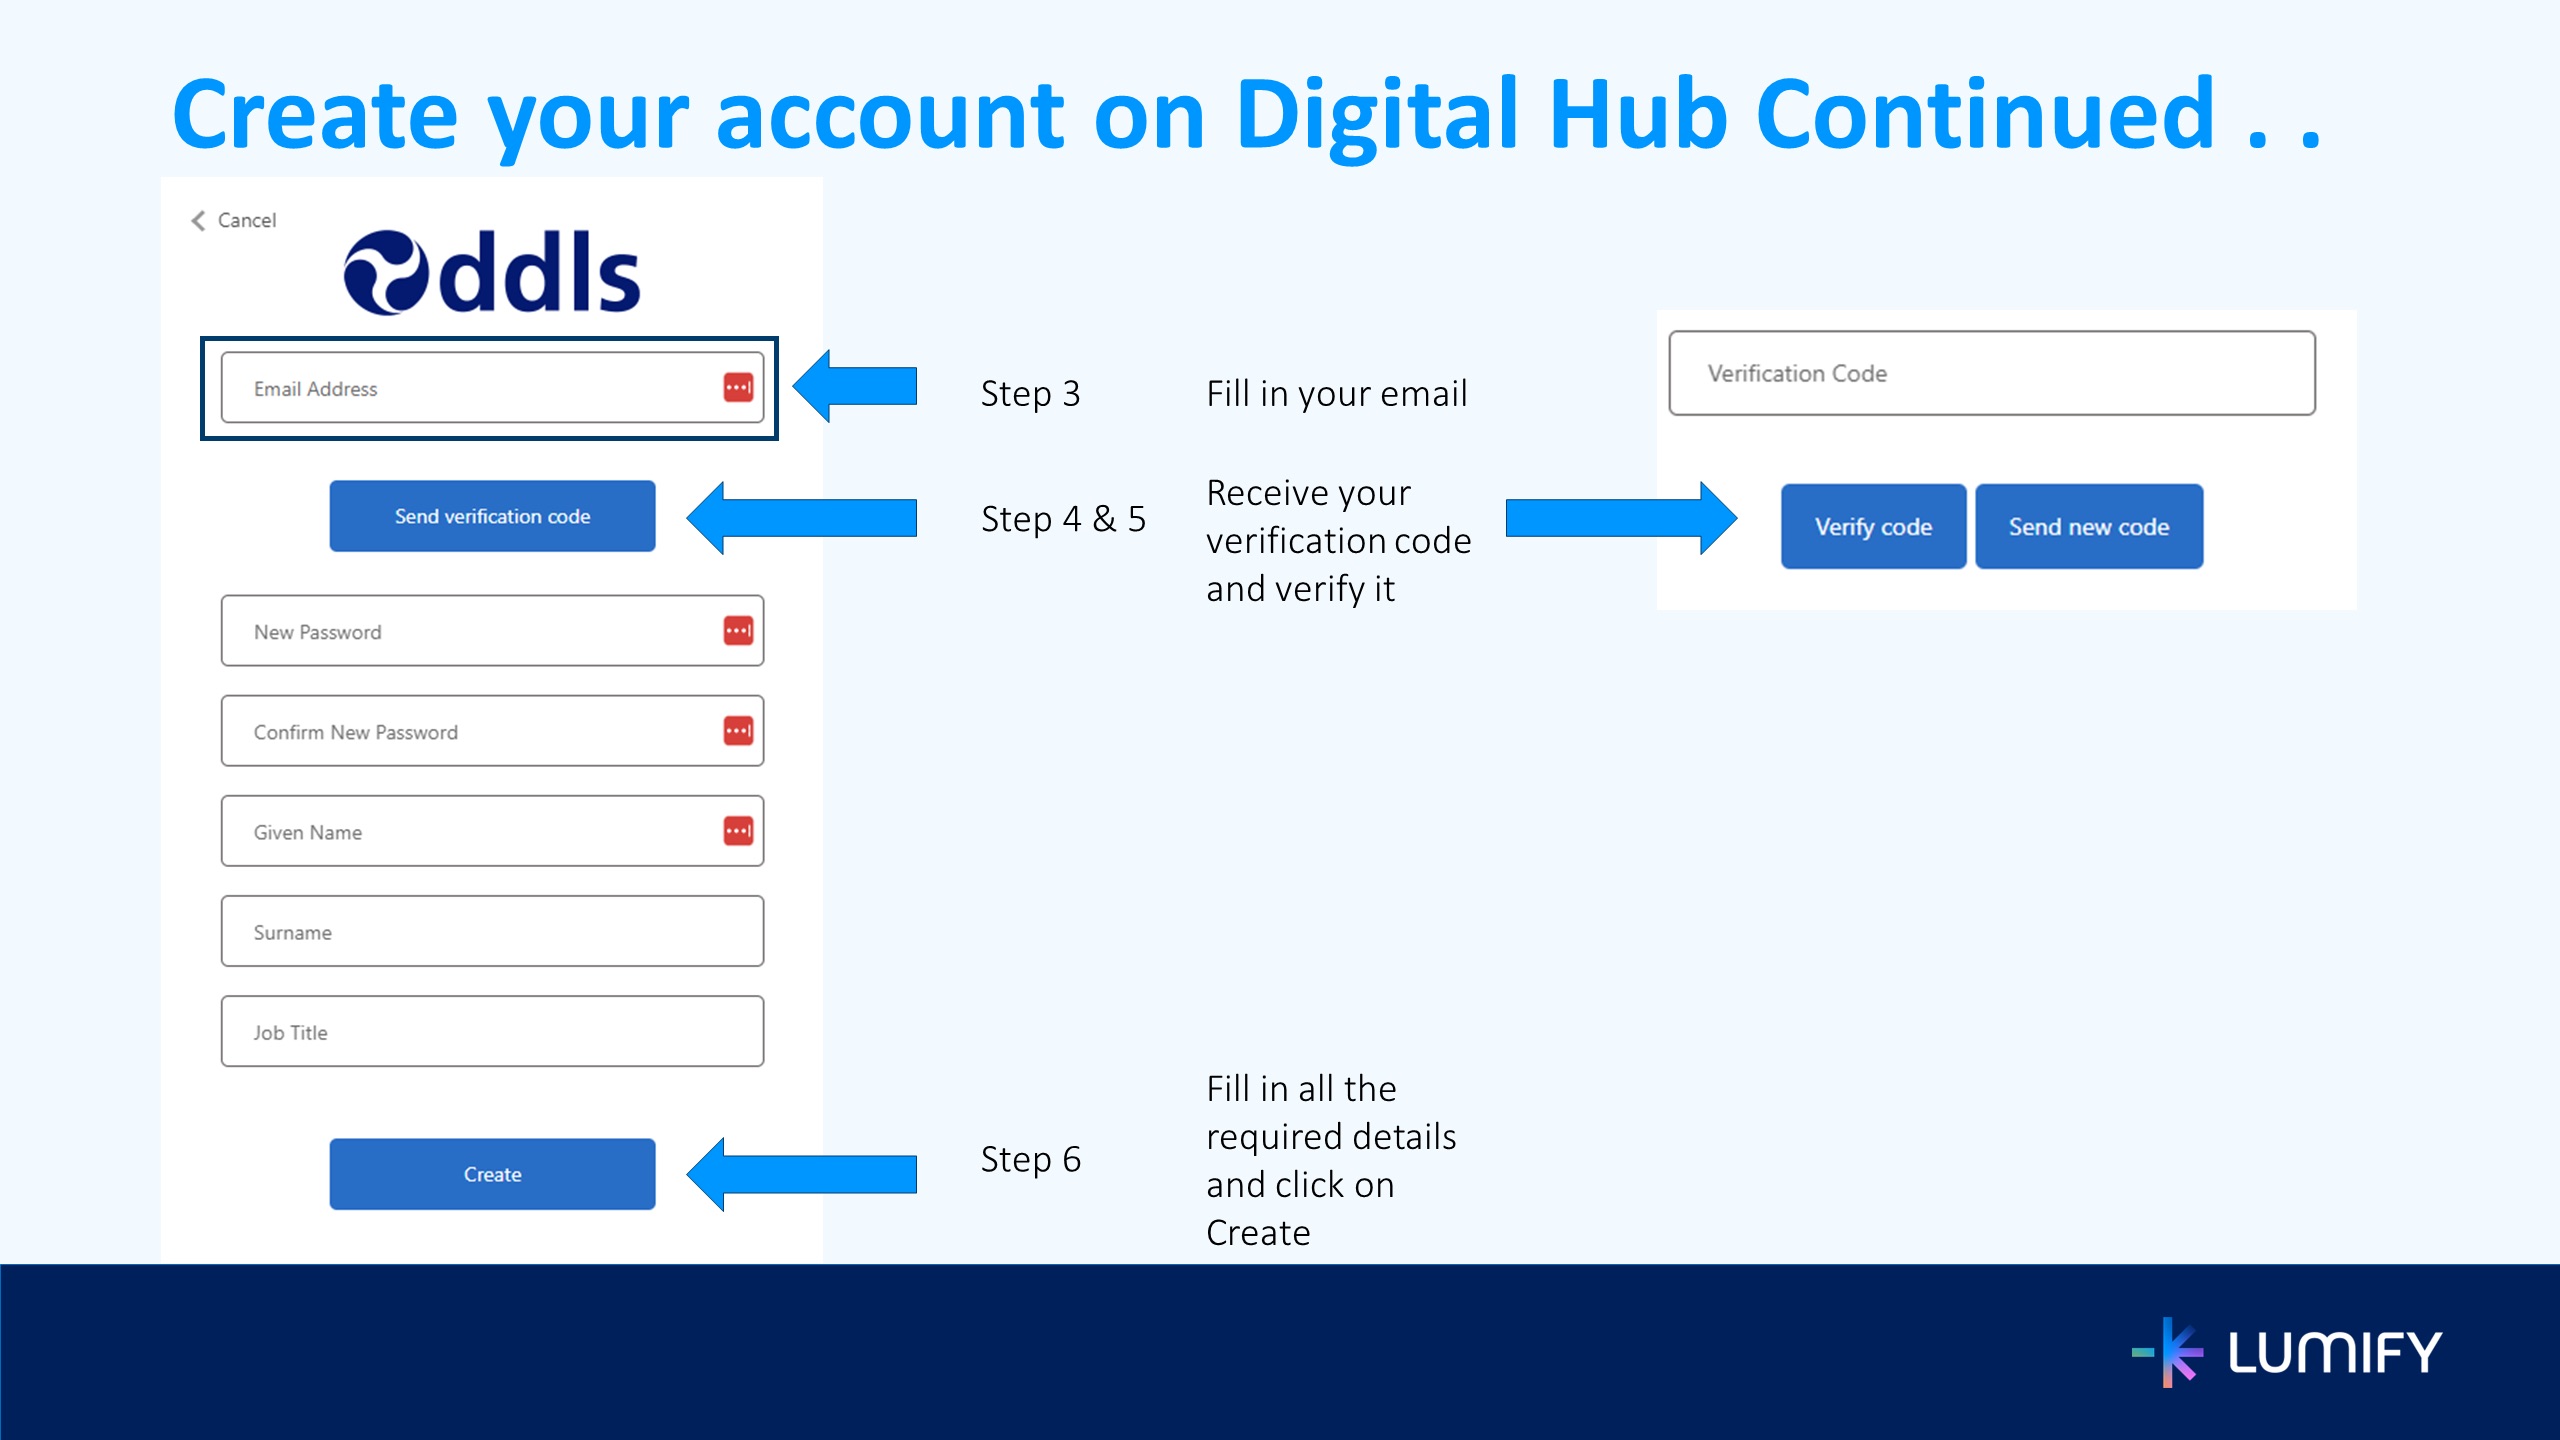 How to sign up on Digital Hub 2/2?